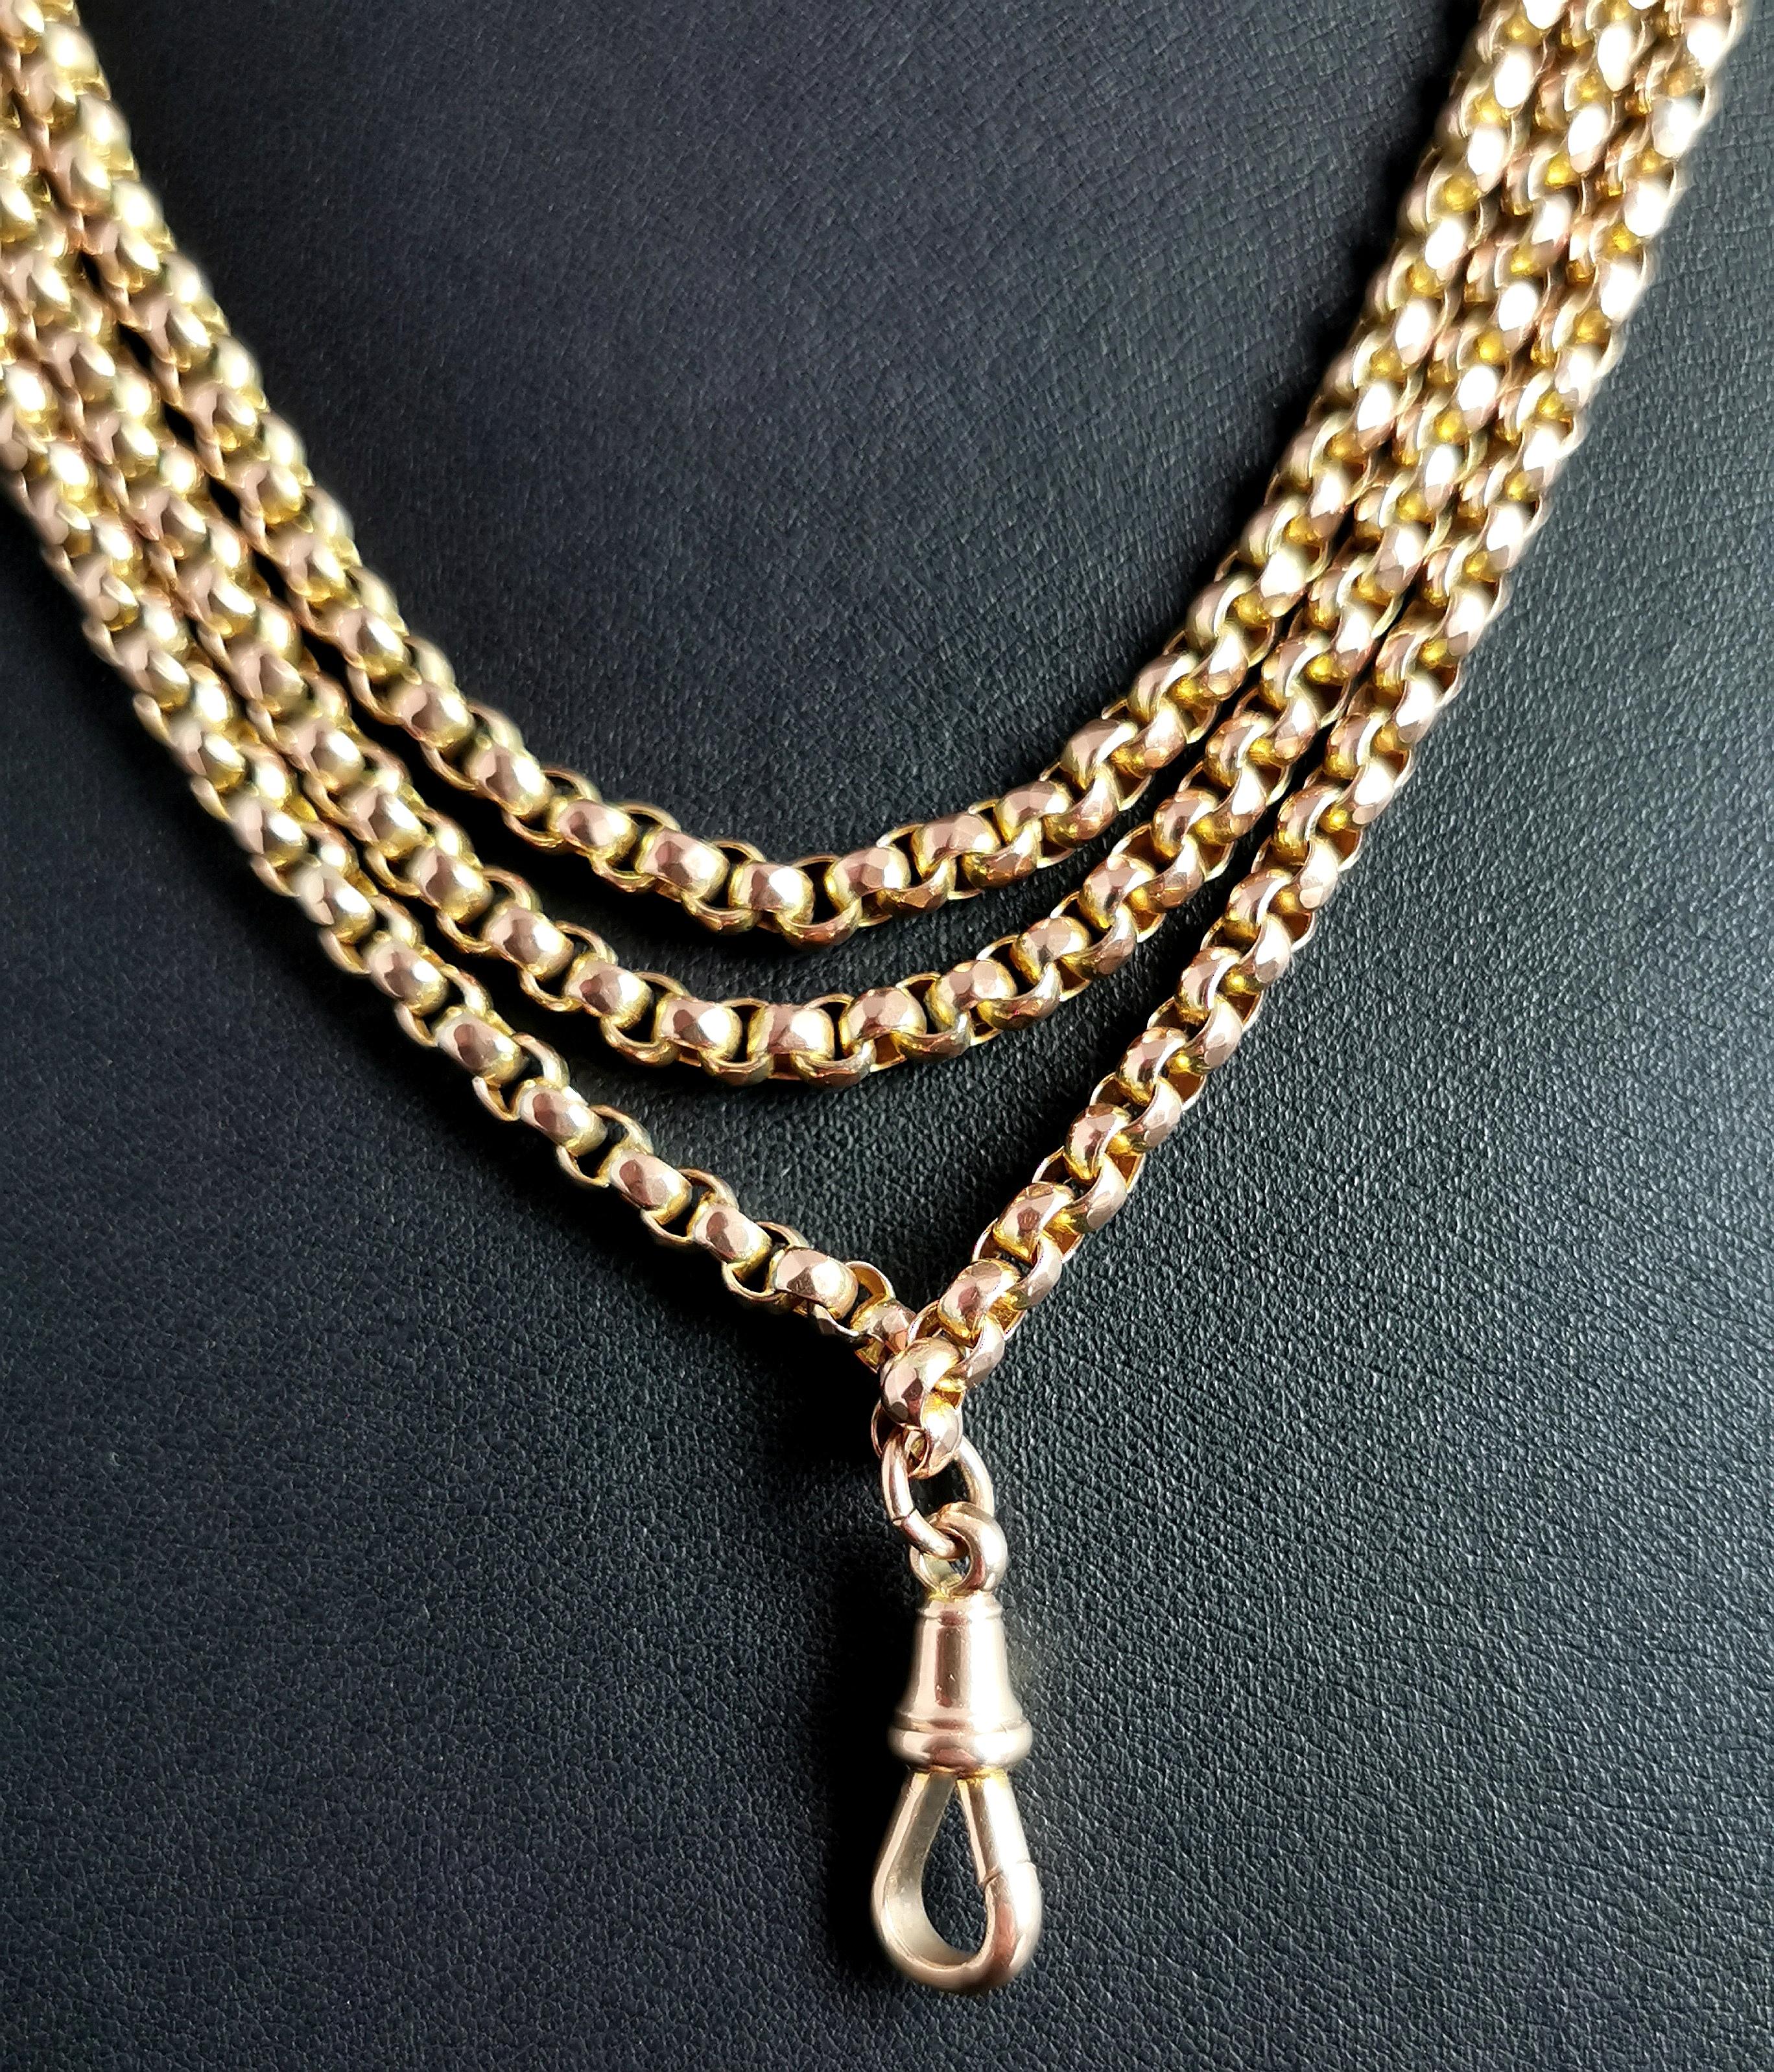 Antique 9k Yellow Gold Longuard Chain Necklace, Muff Chain, Victorian 9